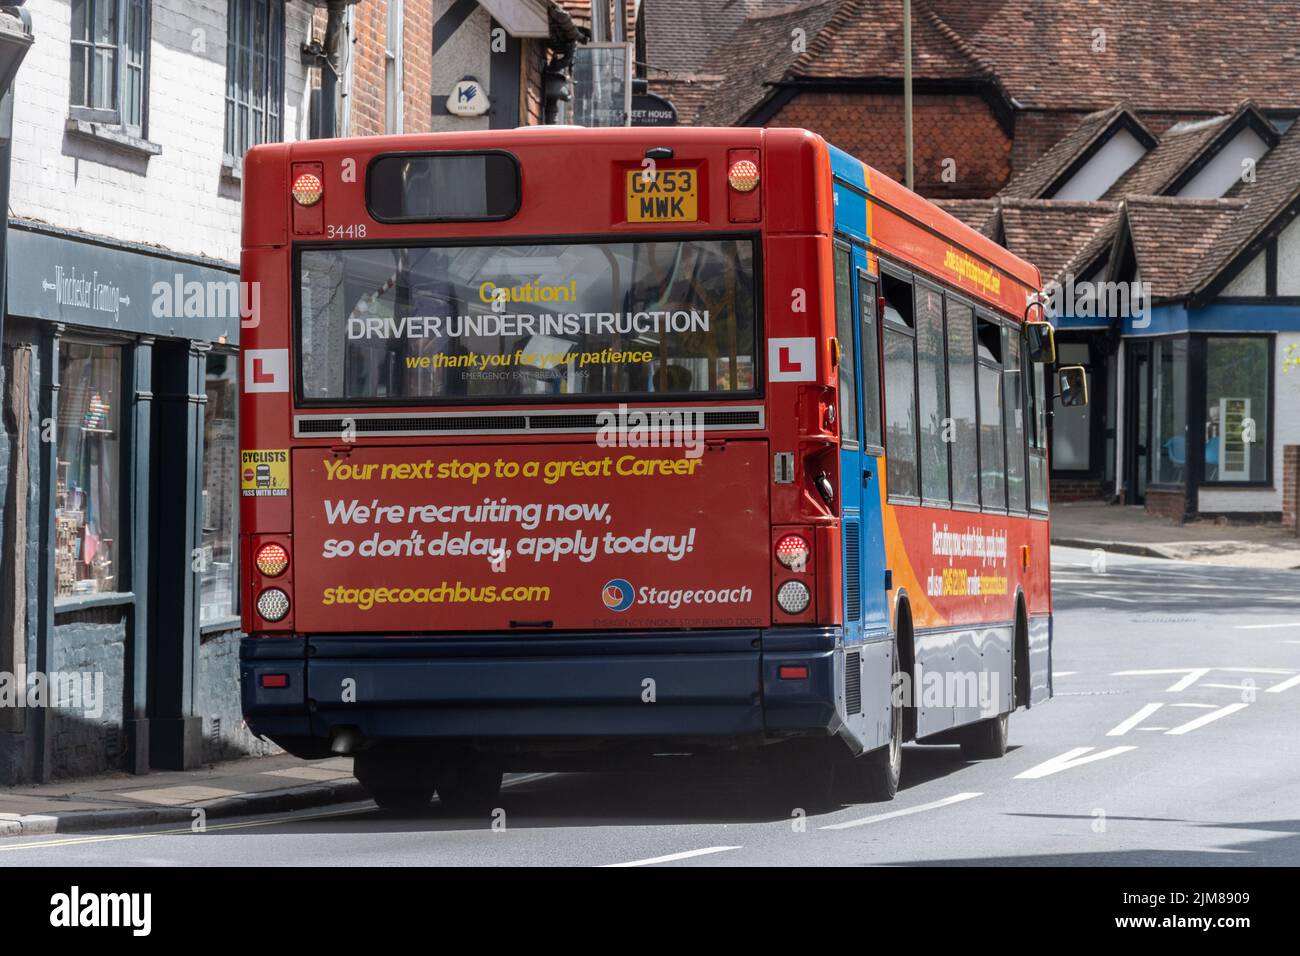 Bus driver under instruction, stagecoach bus with L plates and recruiting now message, UK. Shortage of bus drivers, 2022 Stock Photo